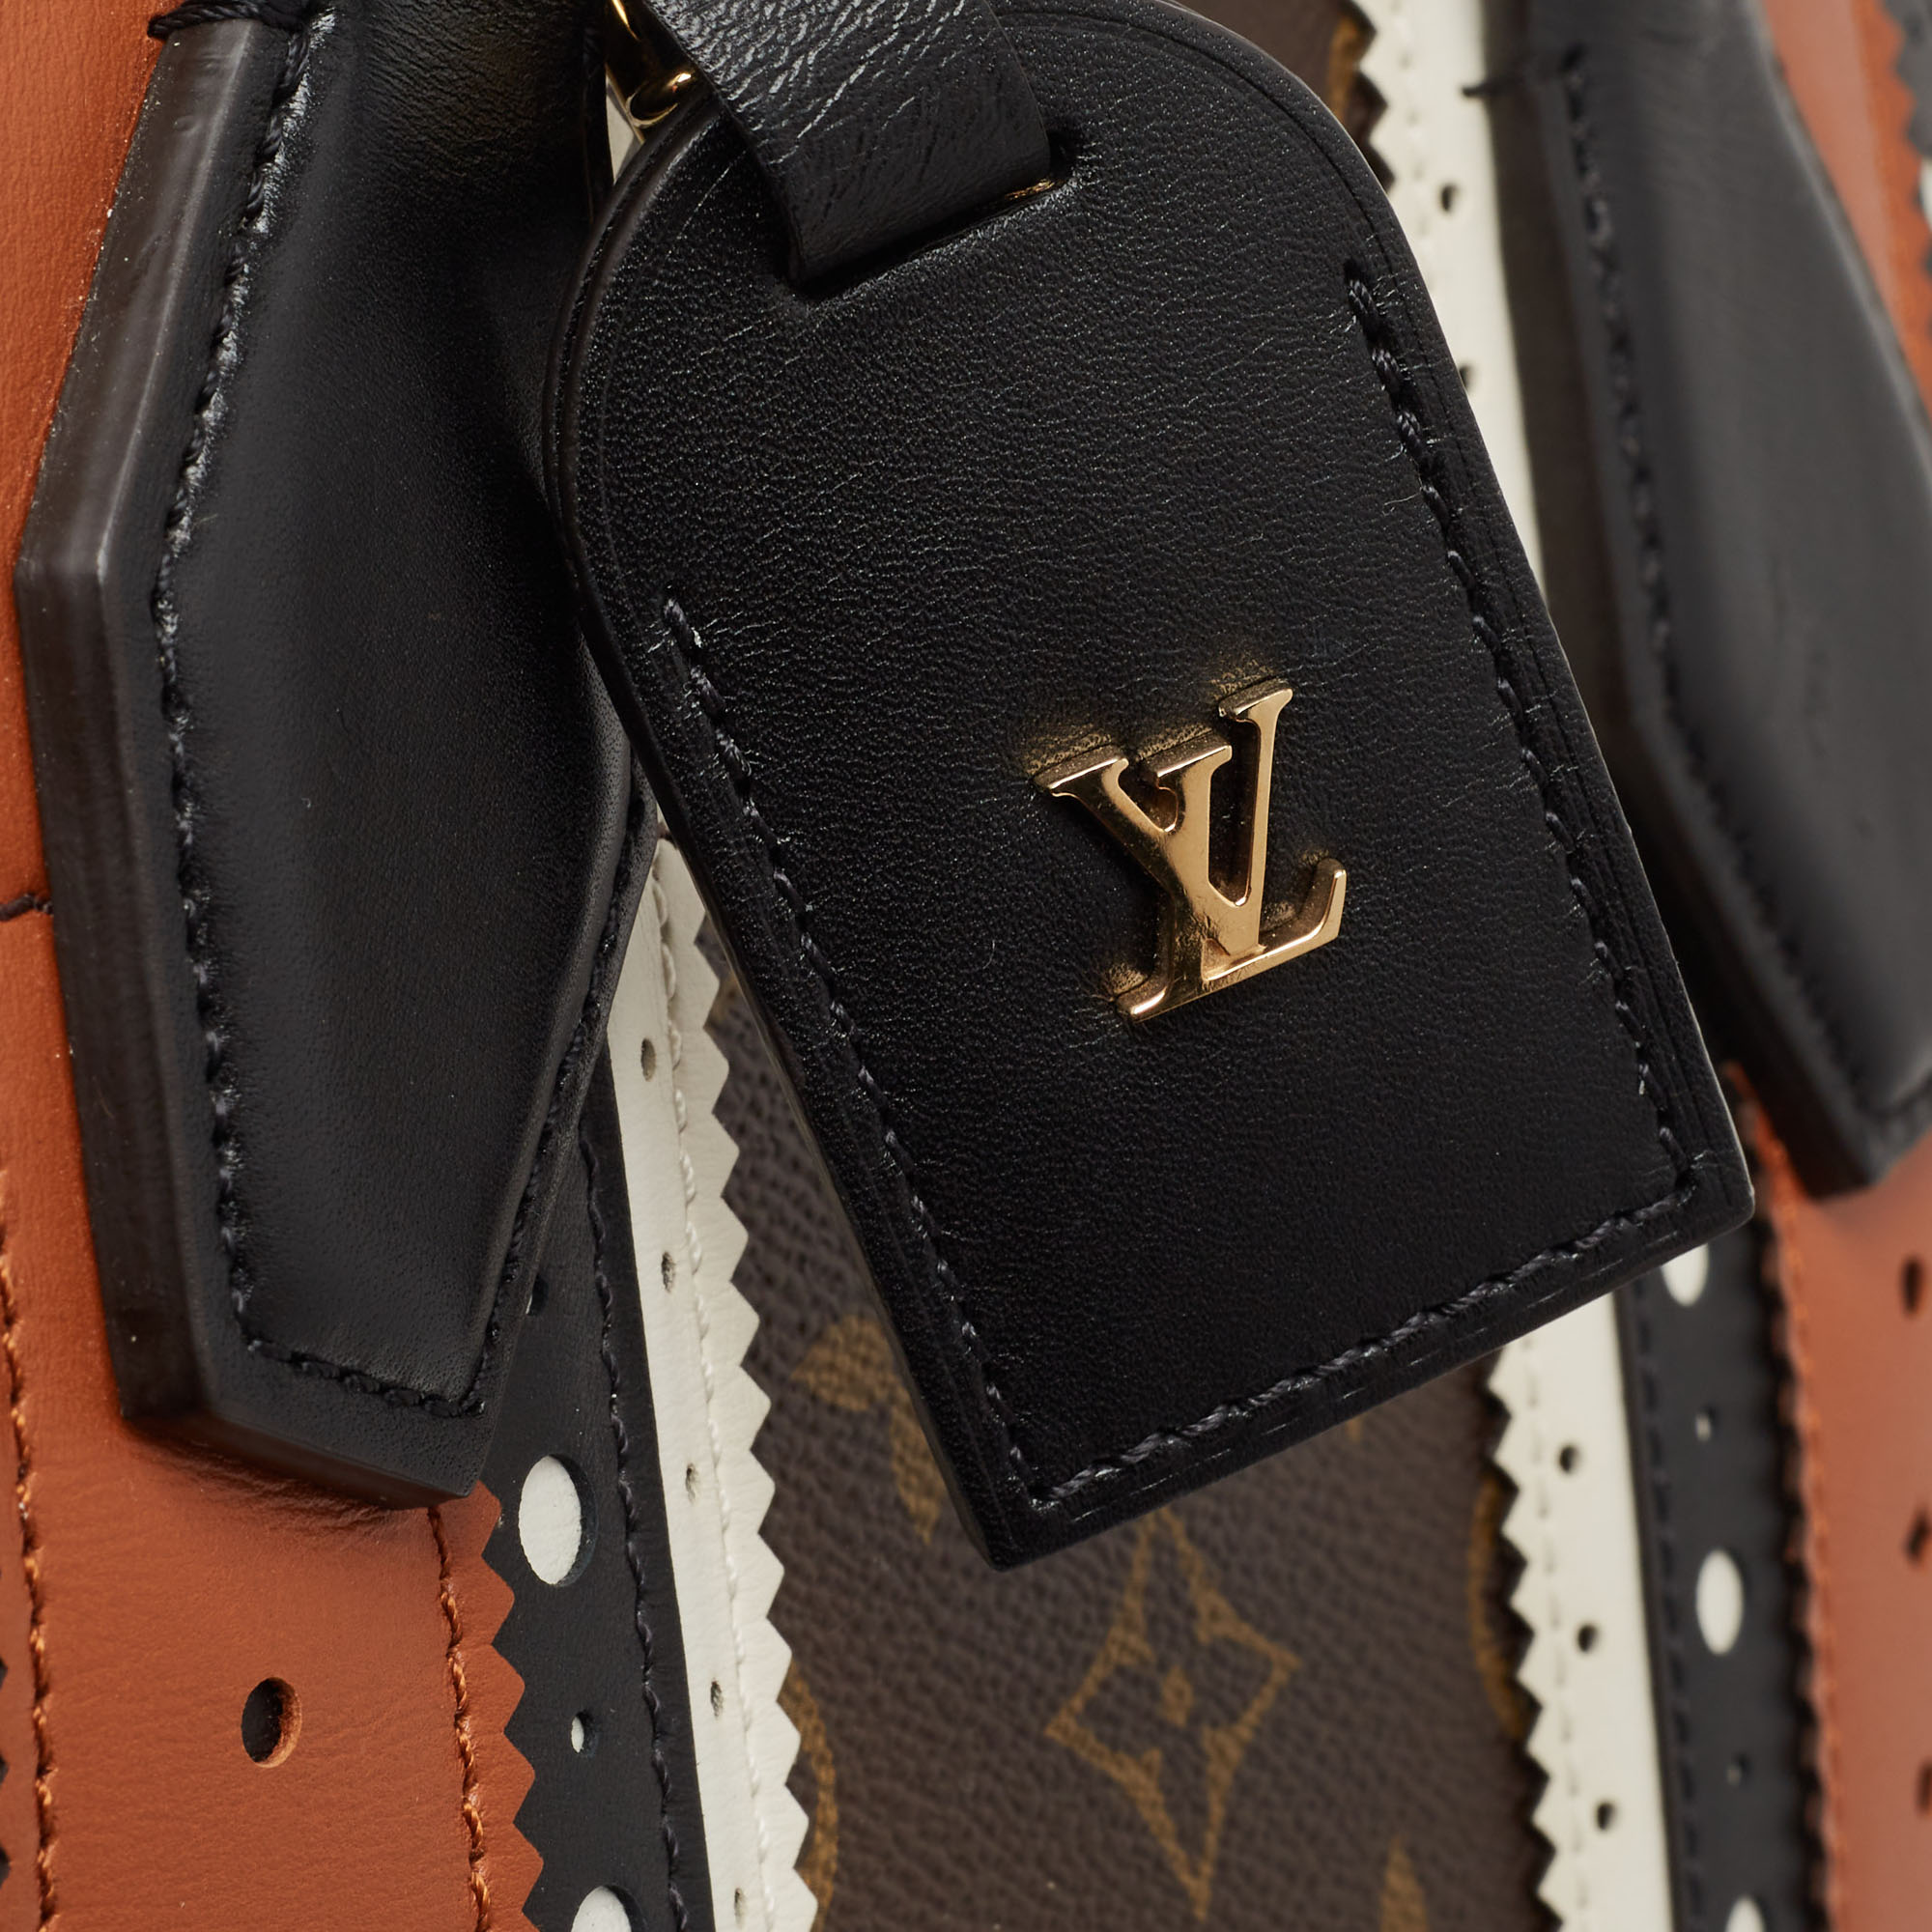 Louis Vuitton Multicolor/Monogram Canvas And Brogues Leather City Steamer MM Bag